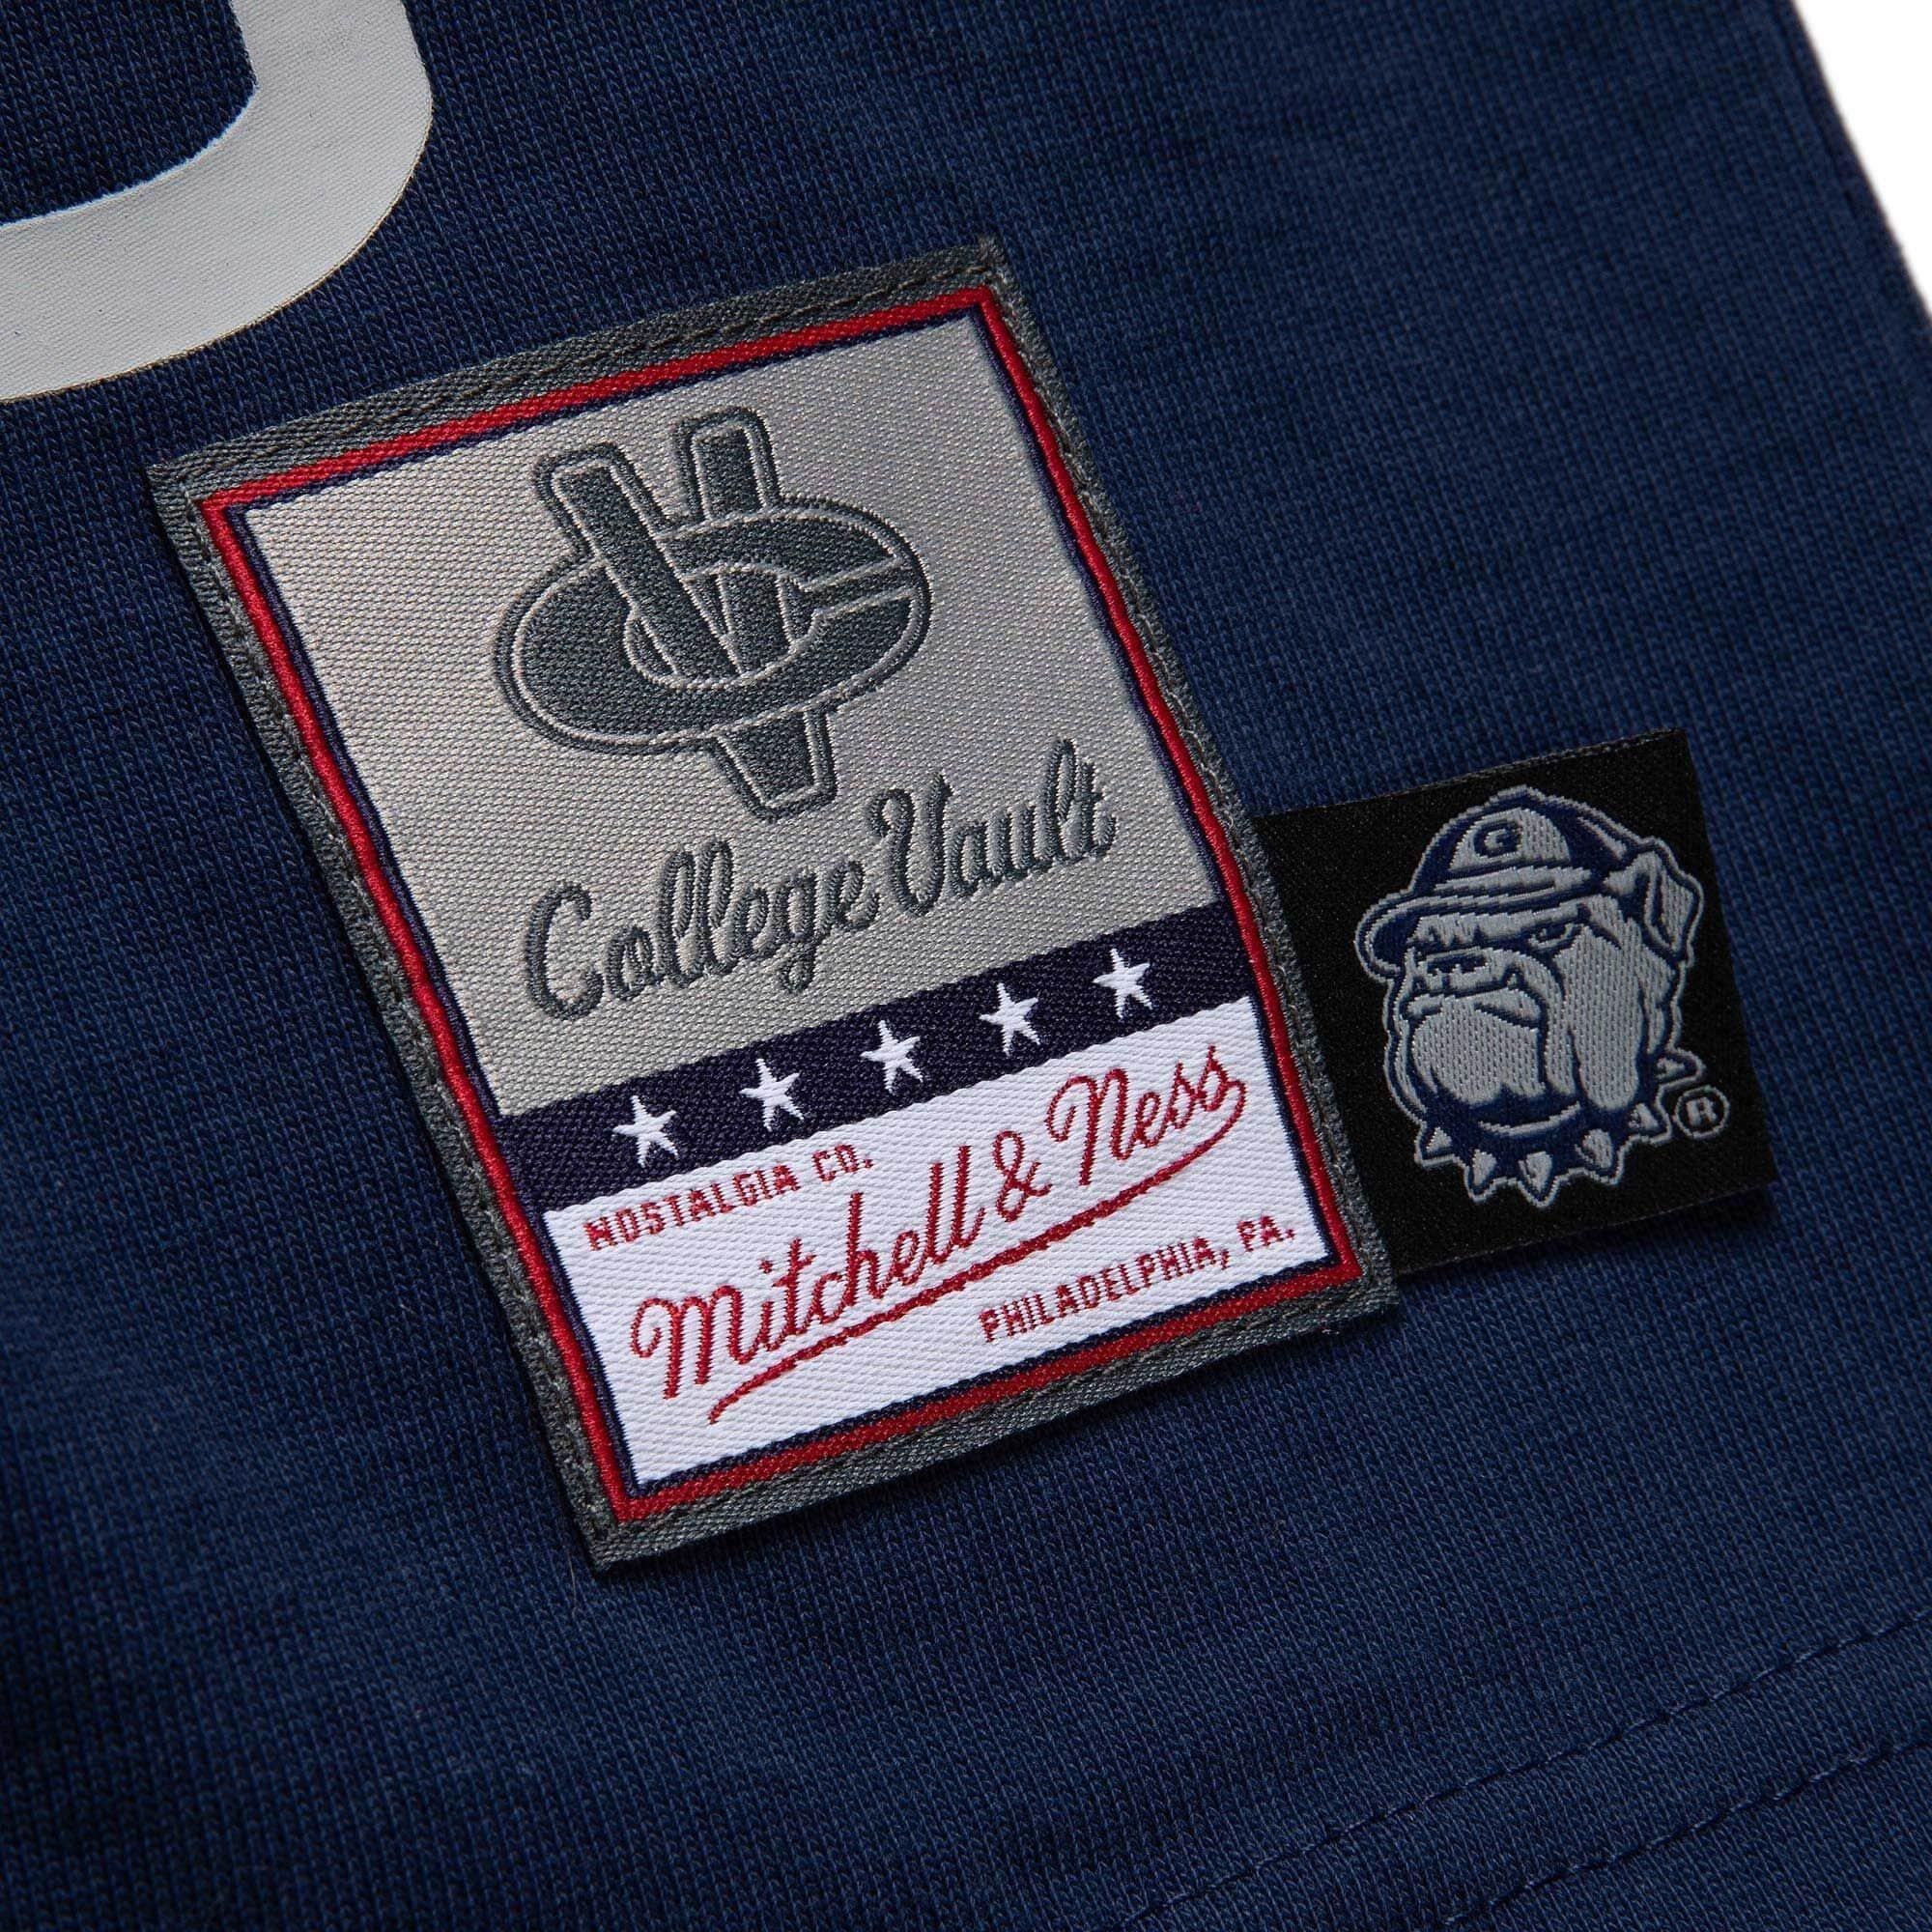 Mitchell & Ness Georgetown Ncaa Baseball Tee In Assorted,at Urban  Outfitters in Blue for Men